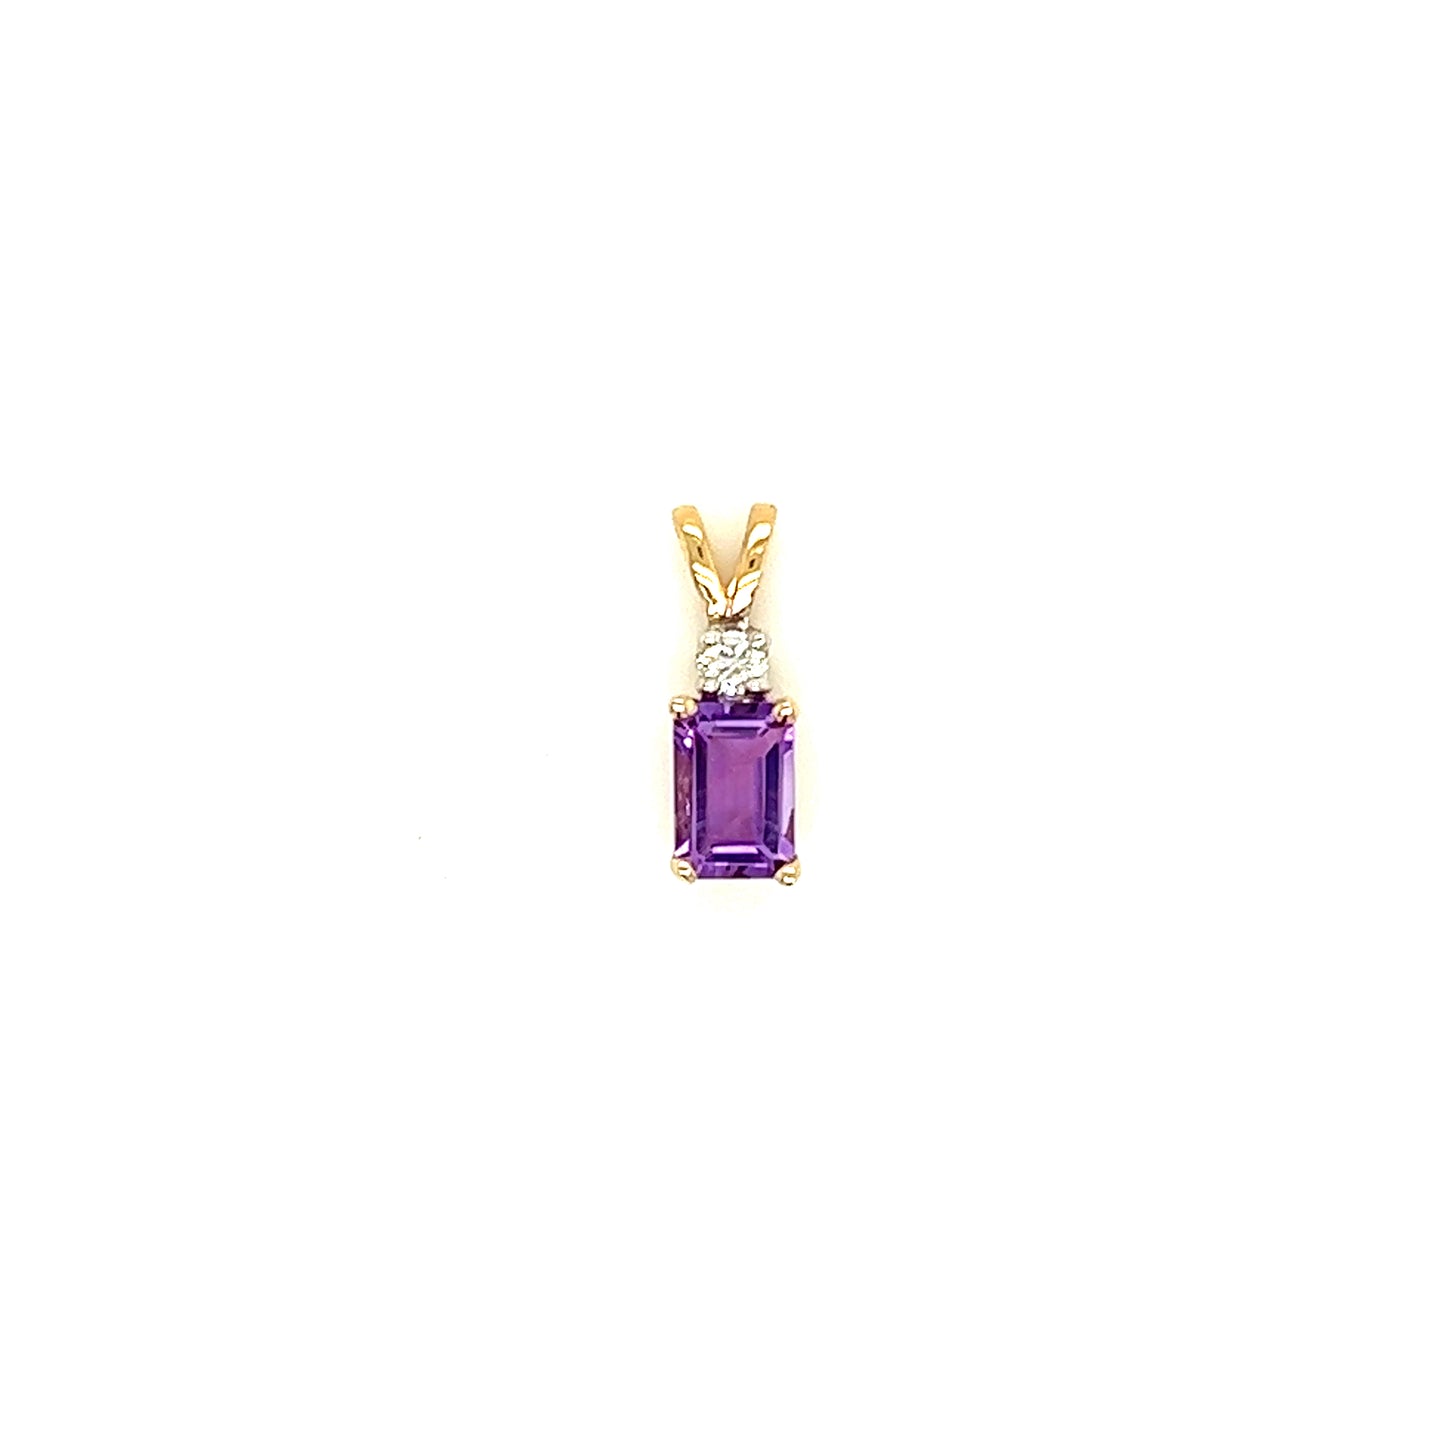 Baguette Amethyst Pendant with Diamond Accent is 14K Yellow Gold Front View